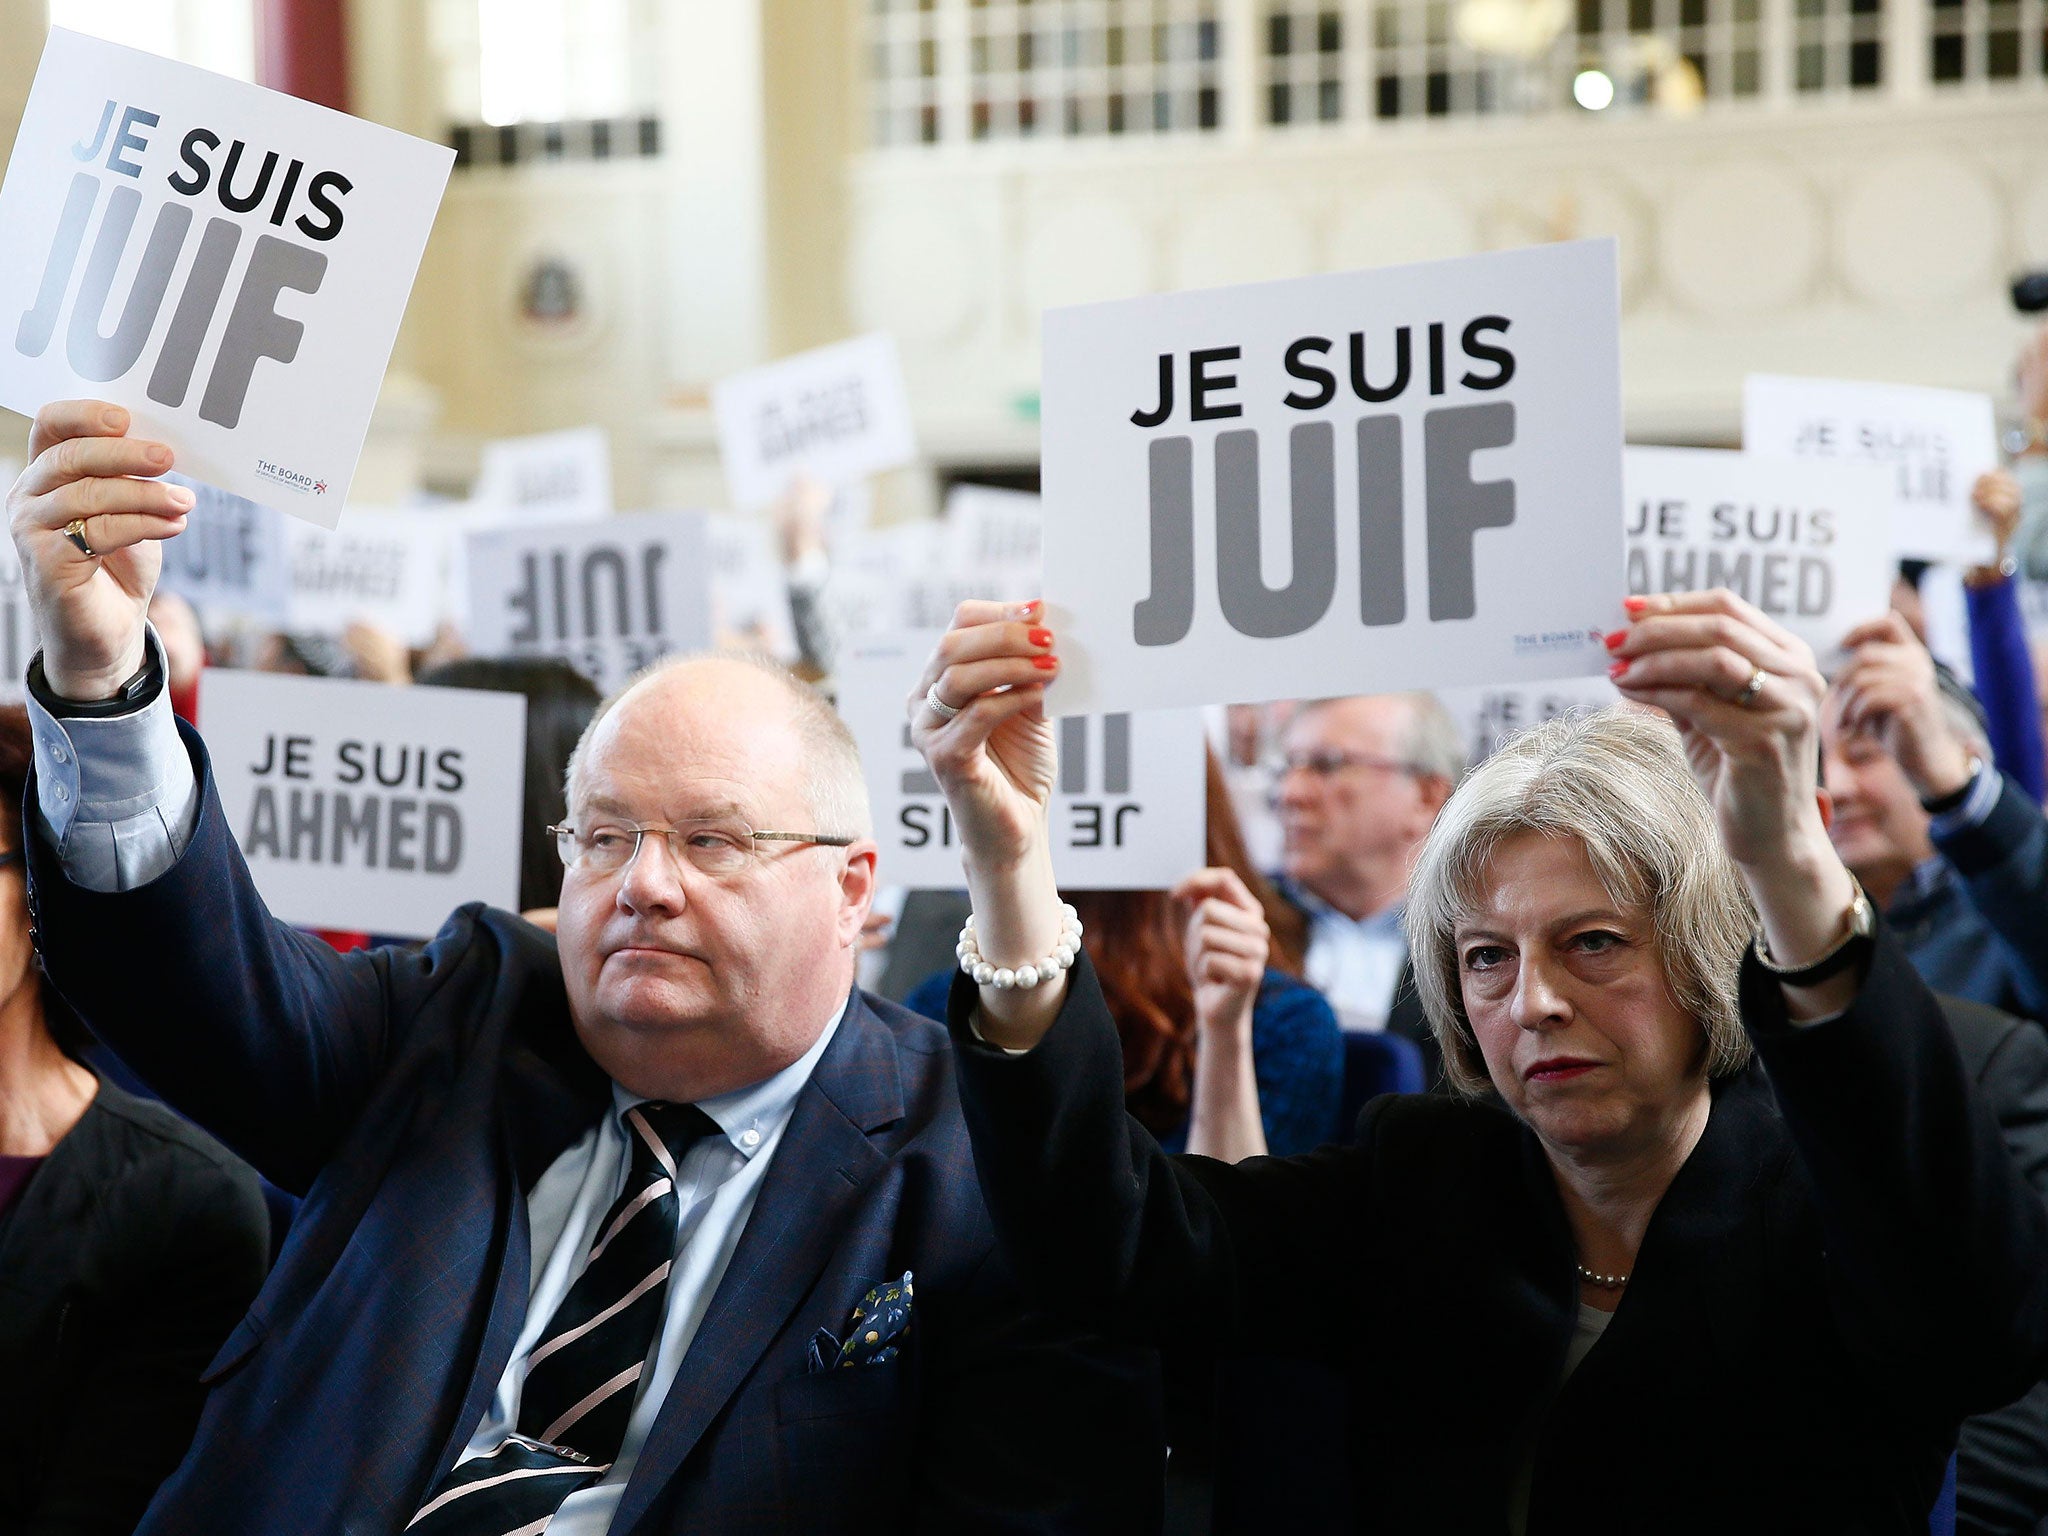 Britain's Secretary of State for Communities Eric Pickles and Home Secretary Theresa May hold up signs reading "I am Jewish" during a Board of Deputies of British Jews event in London